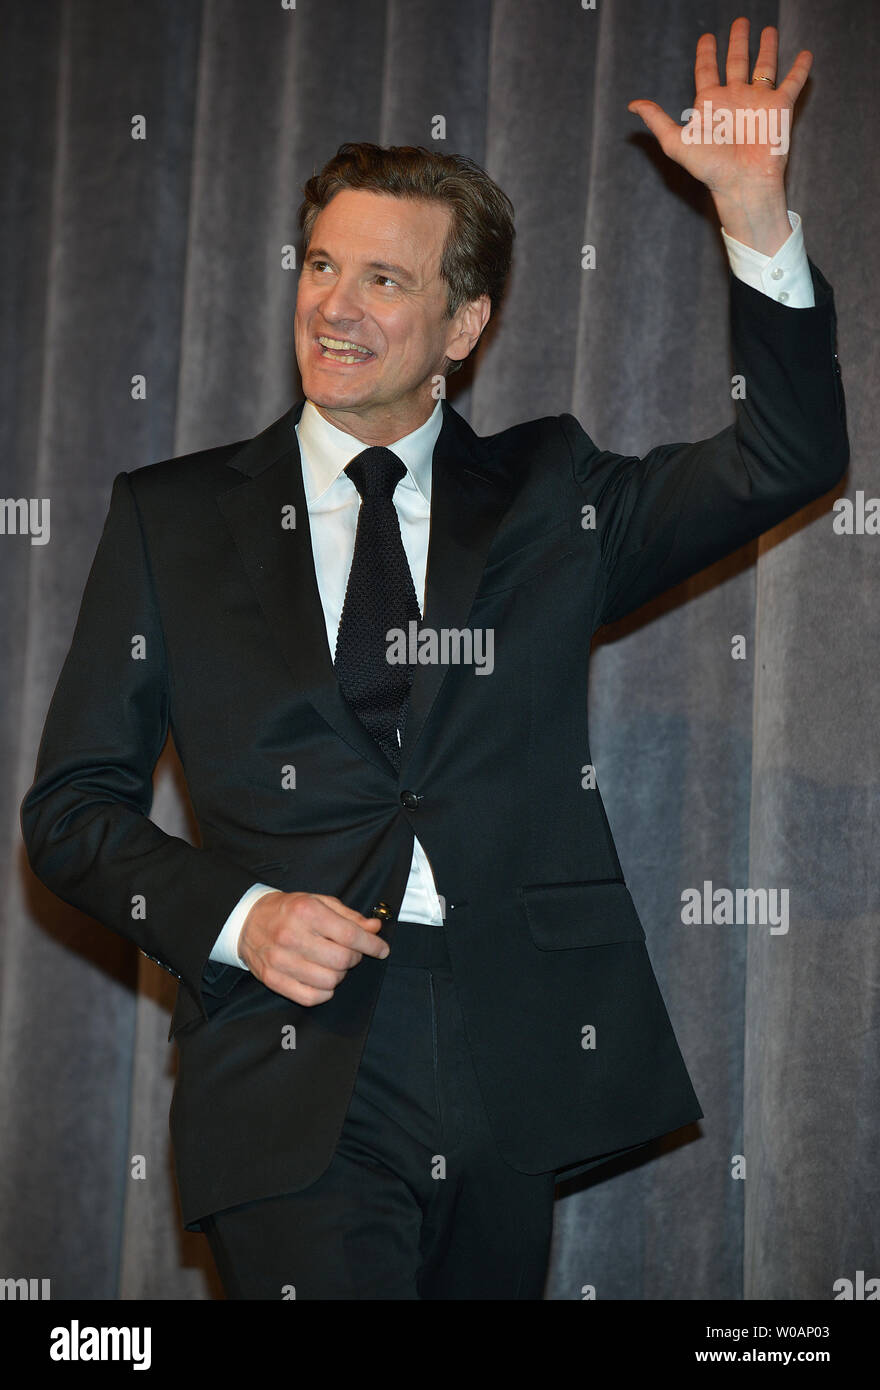 Colin Firth attends the gala screening of 'The Railway Man' at Roy Thomson Hall during the Toronto International Film Festival in Toronto, Canada on September 6, 2013.  UPI/Christine Chew Stock Photo